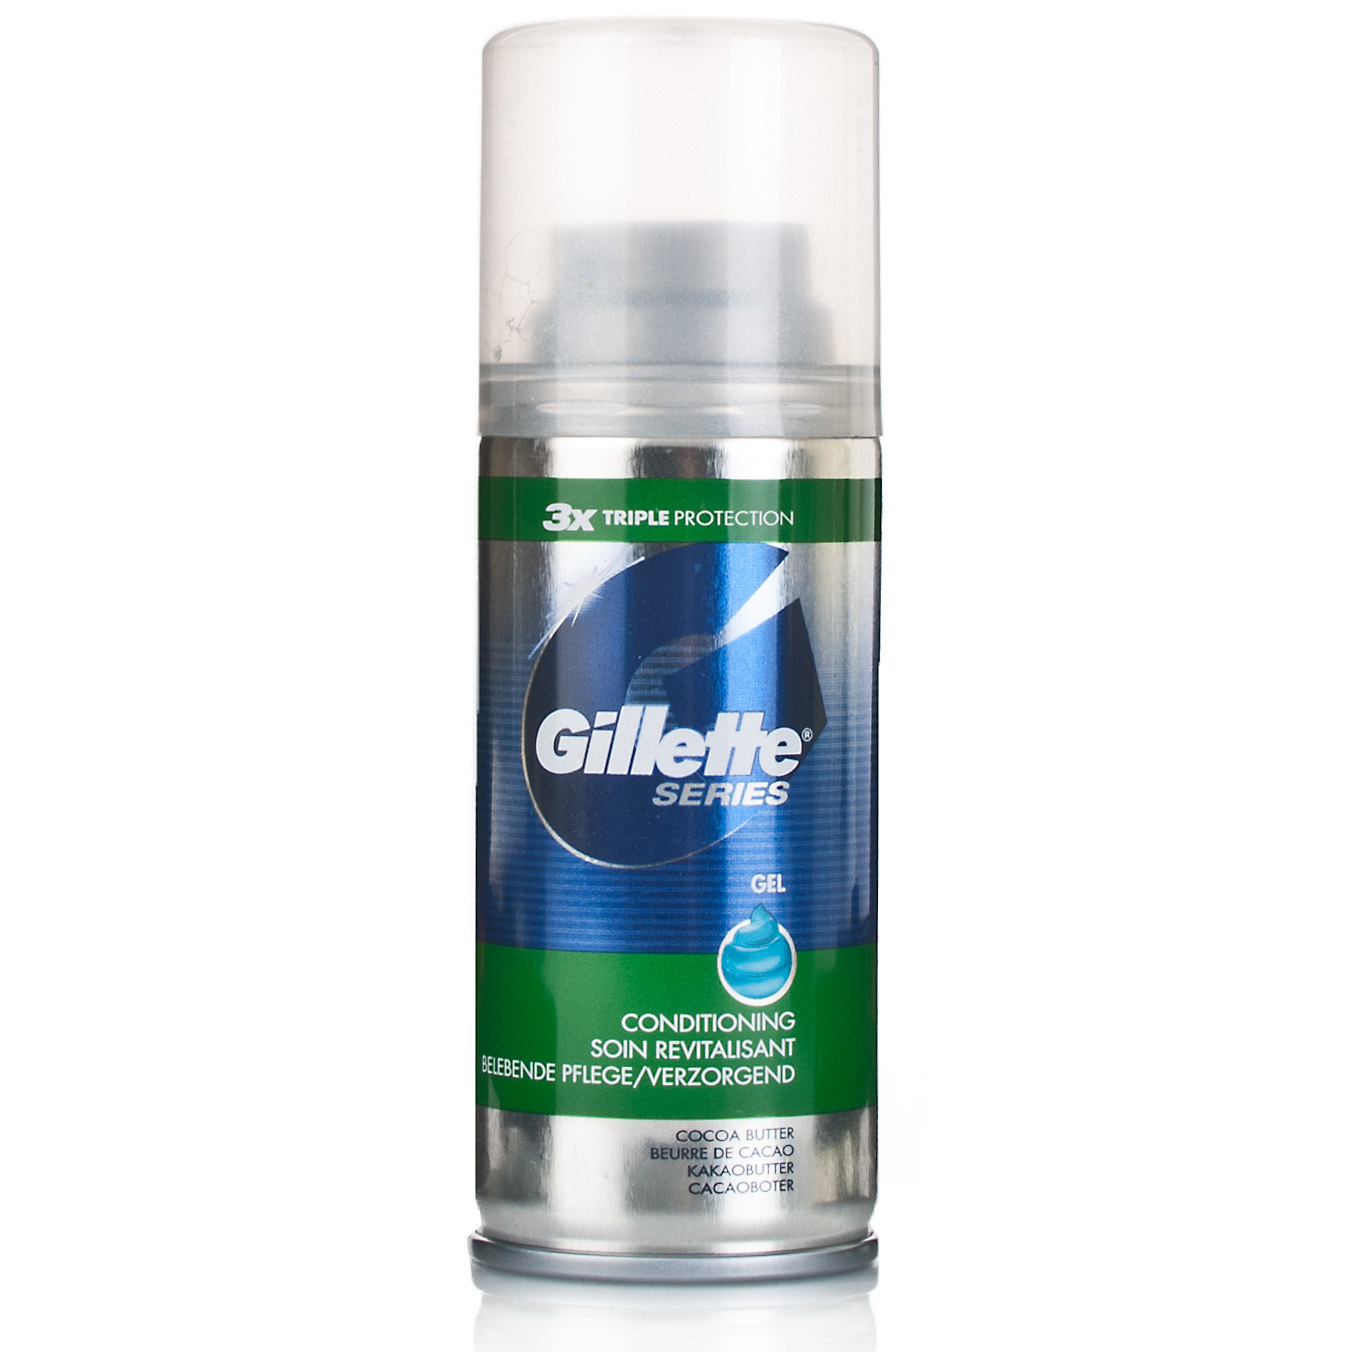 Gillette Series Conditioning Shave Gel Travel Size